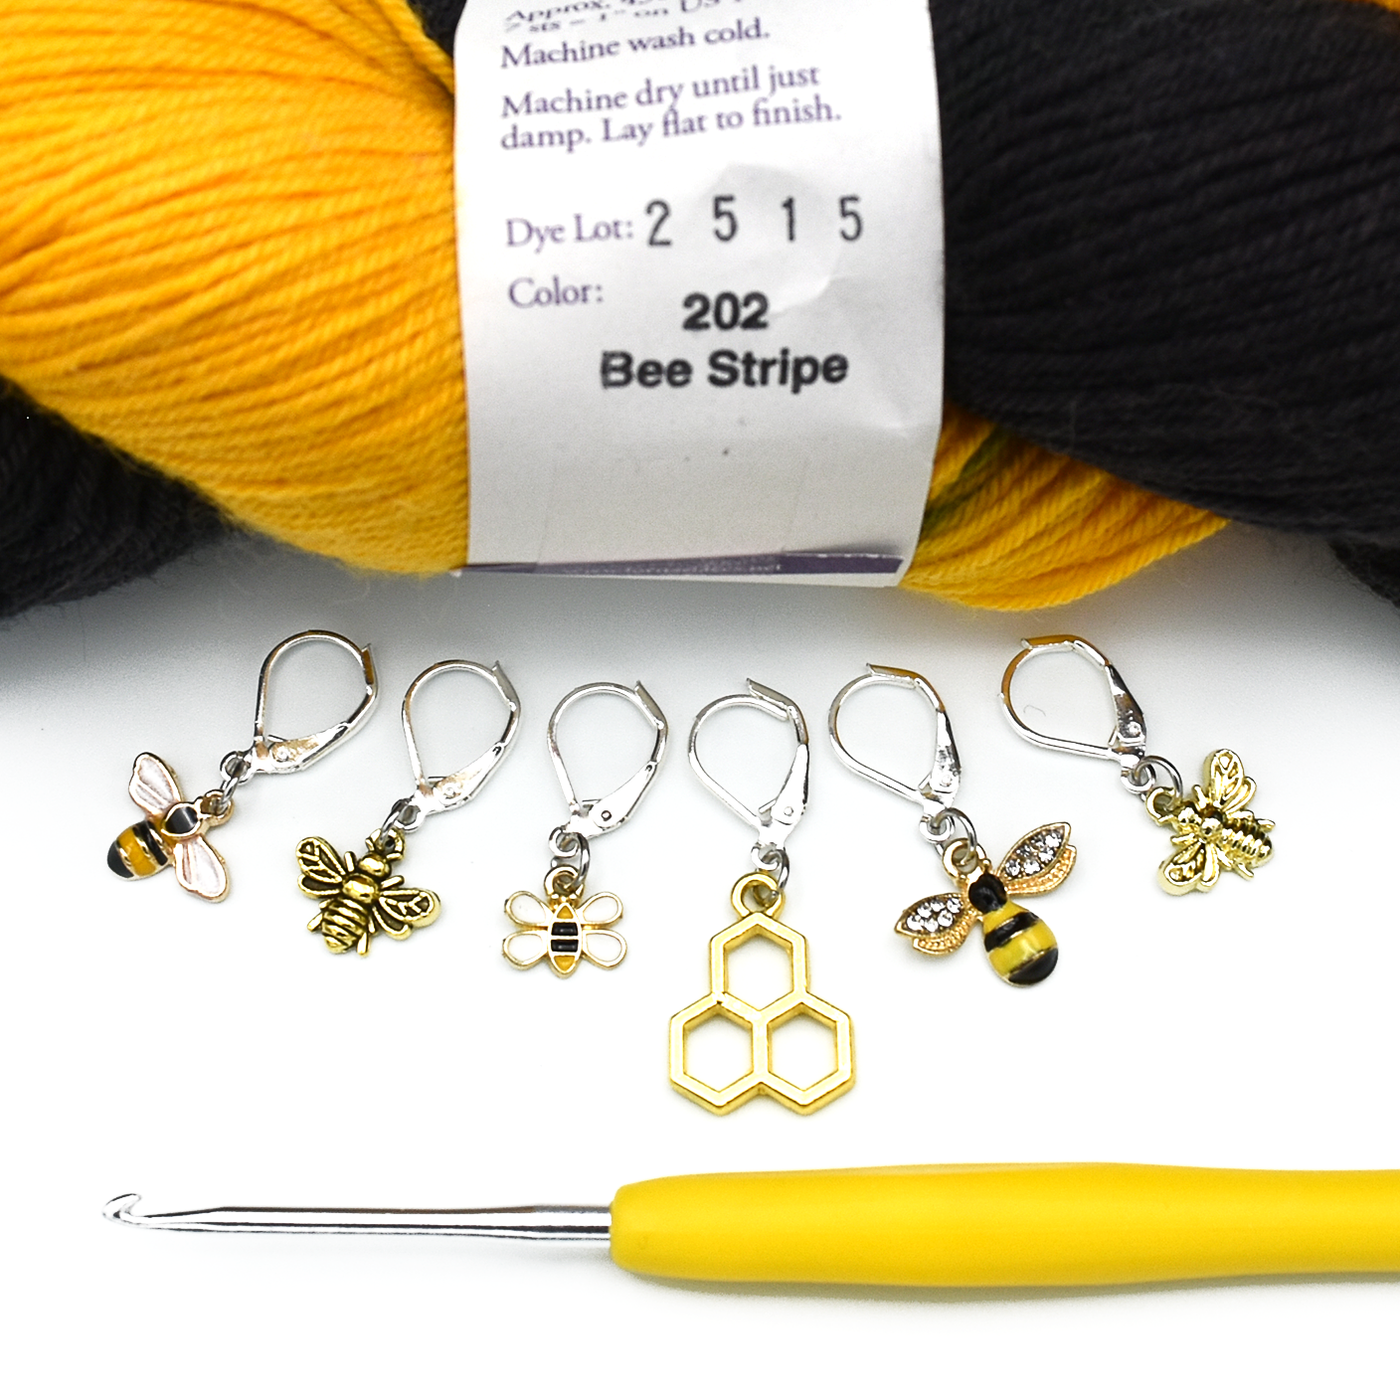 What Are Stitch Markers And How Do I Use Them In Crochet? - Bee Stitch'd